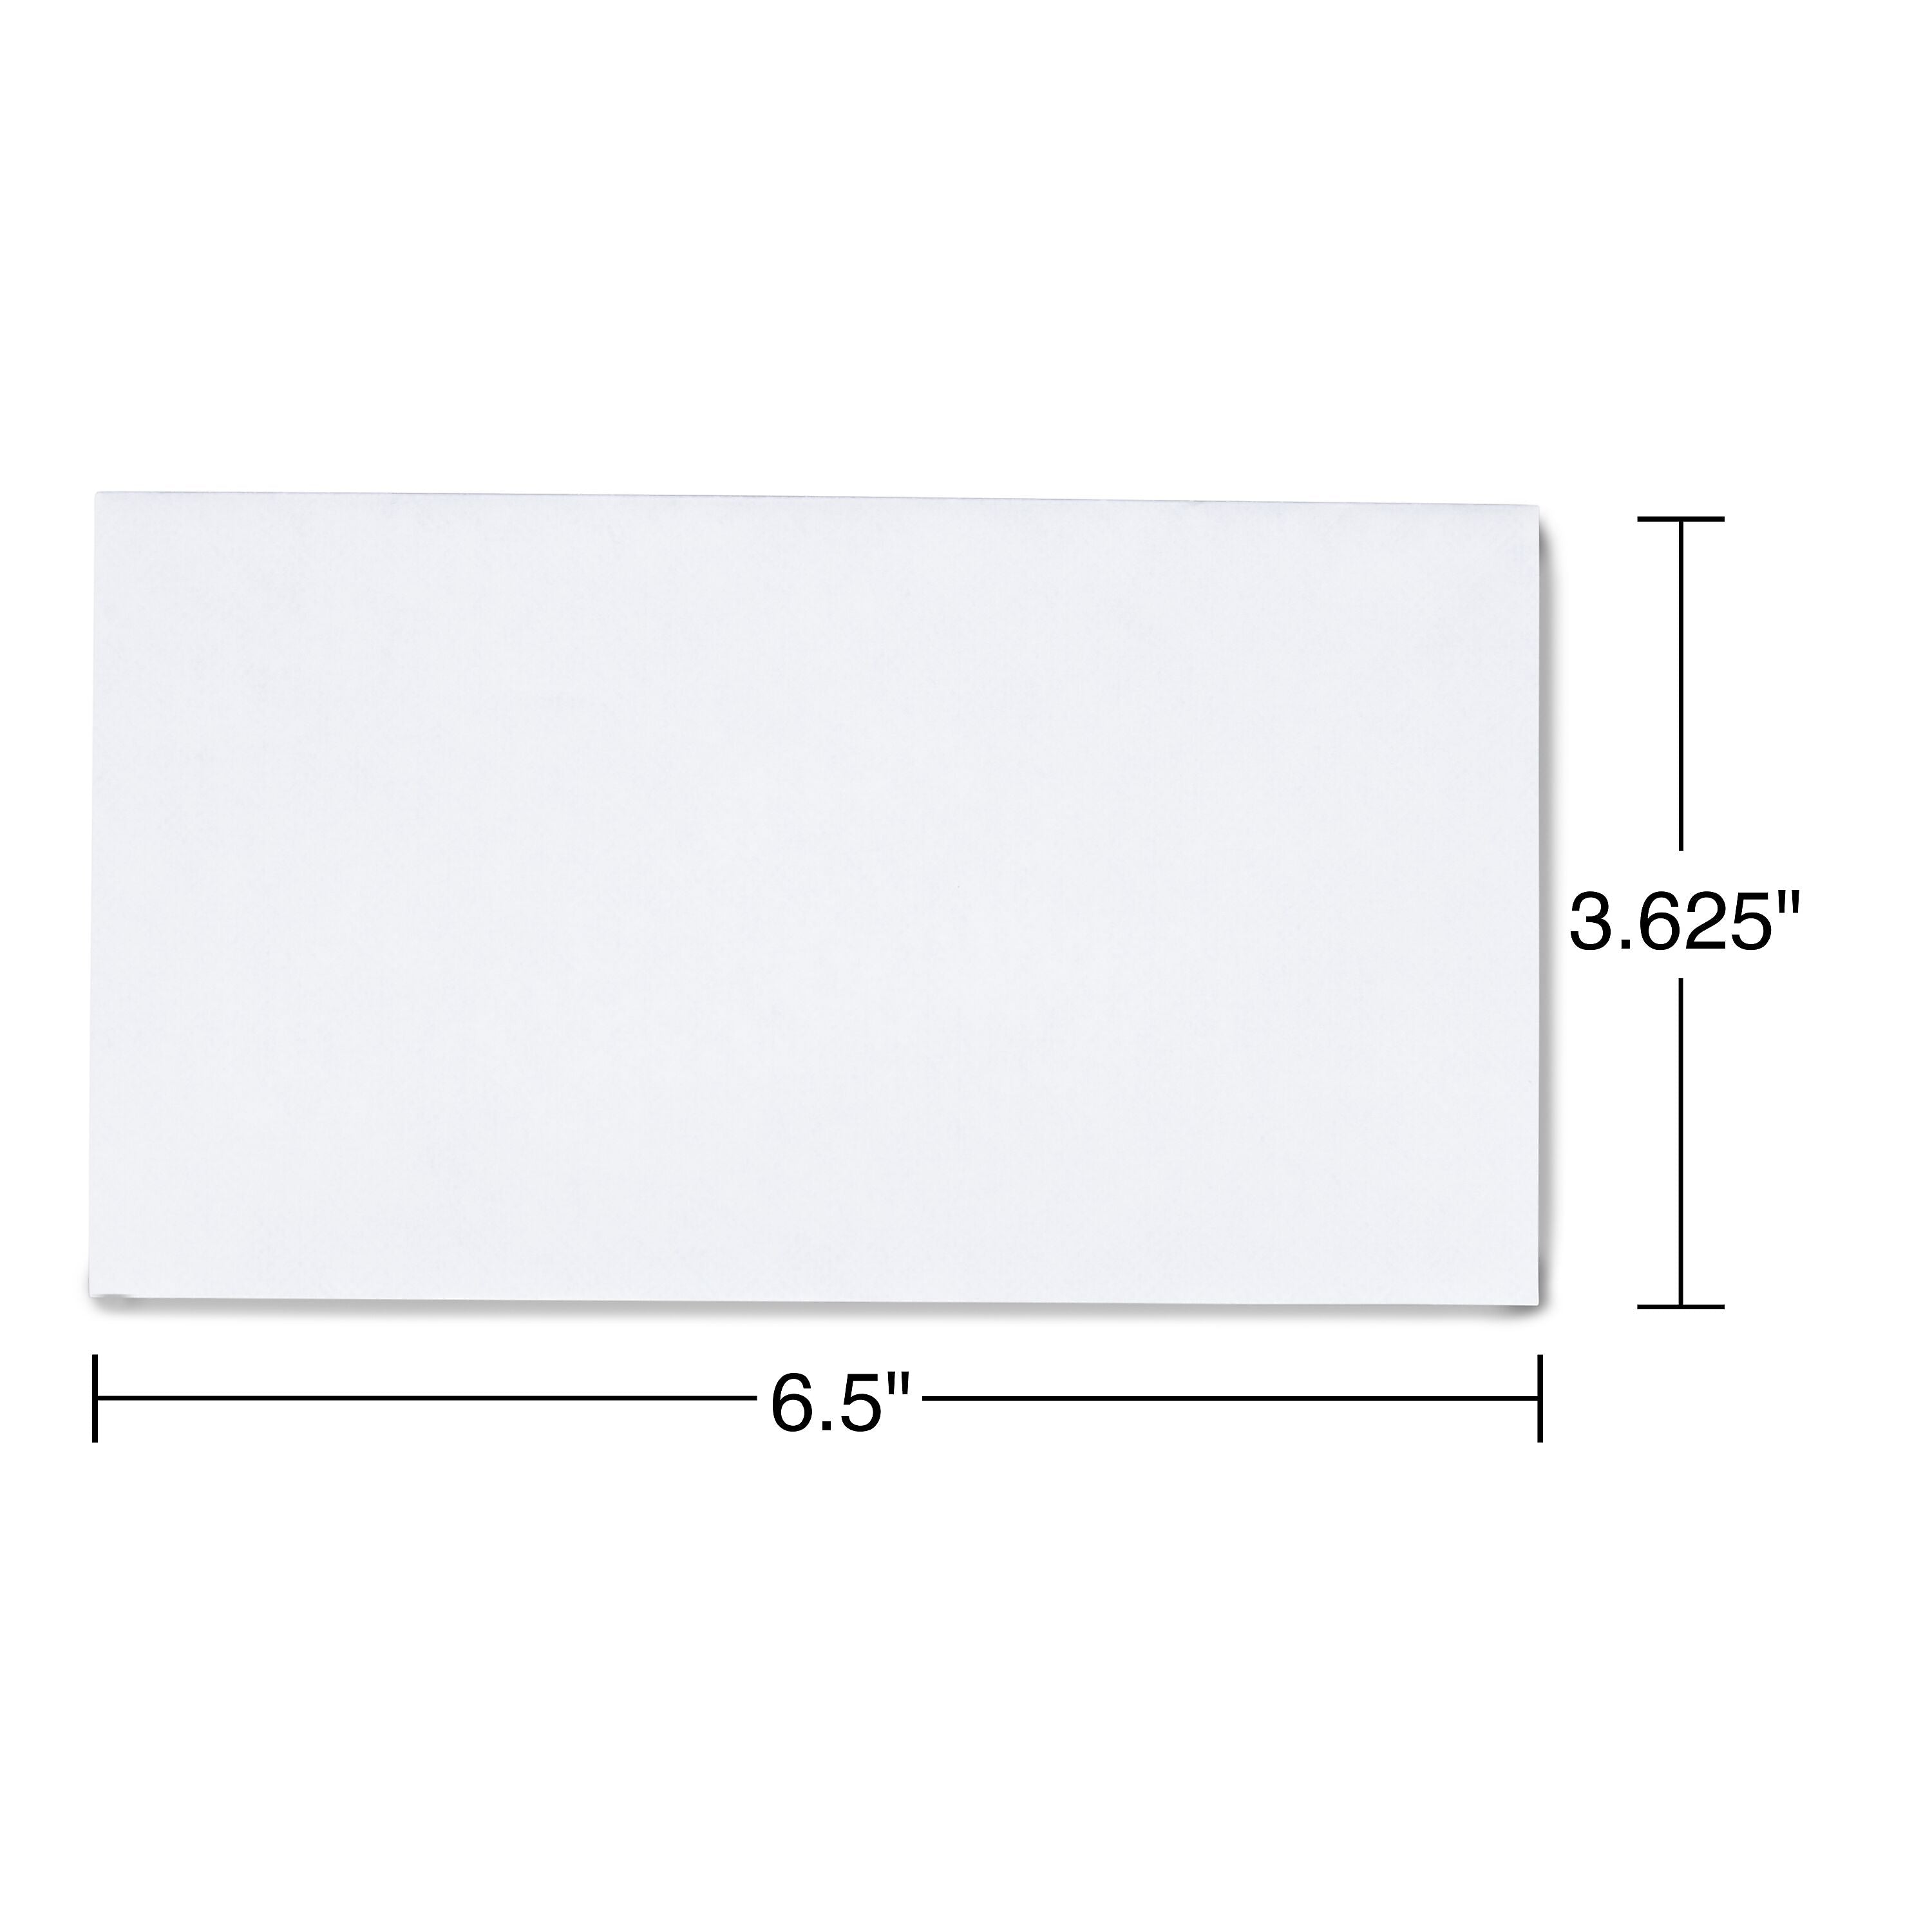 Staples Self Seal Security Tinted #6 3/4 Business Envelopes, 3 5/8" x 6 1/2", White, 50/Box